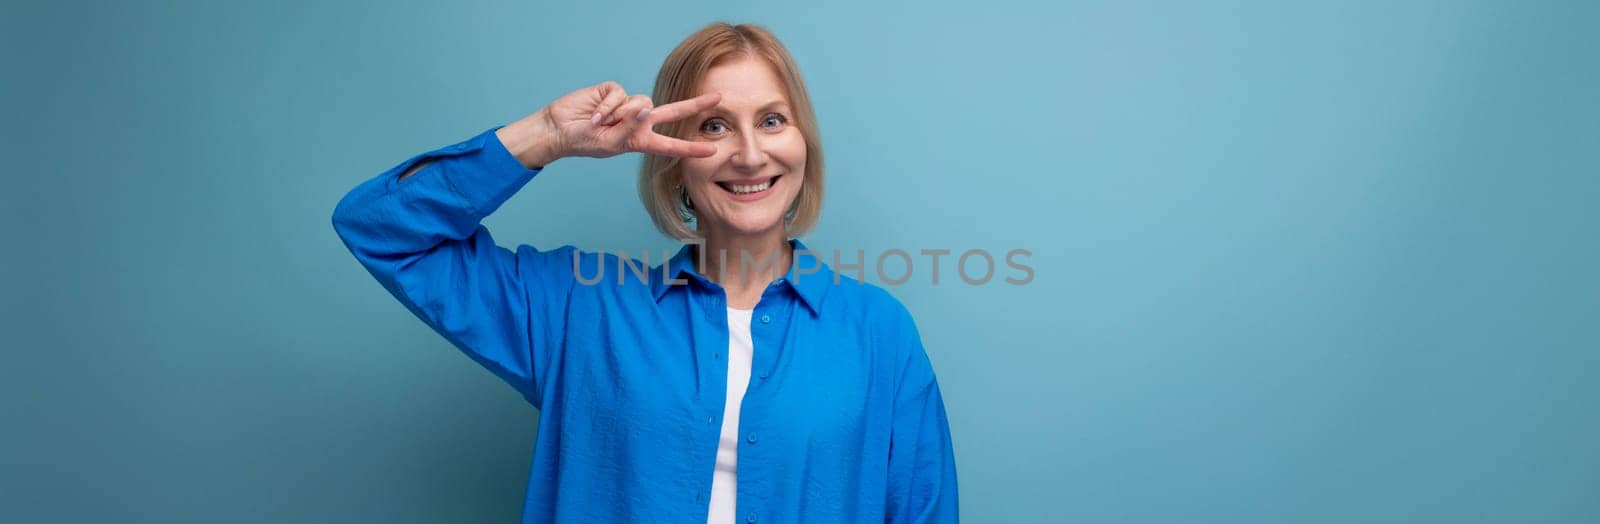 close-up of a charming mature woman in a blue shirt on a blue background with copy space.